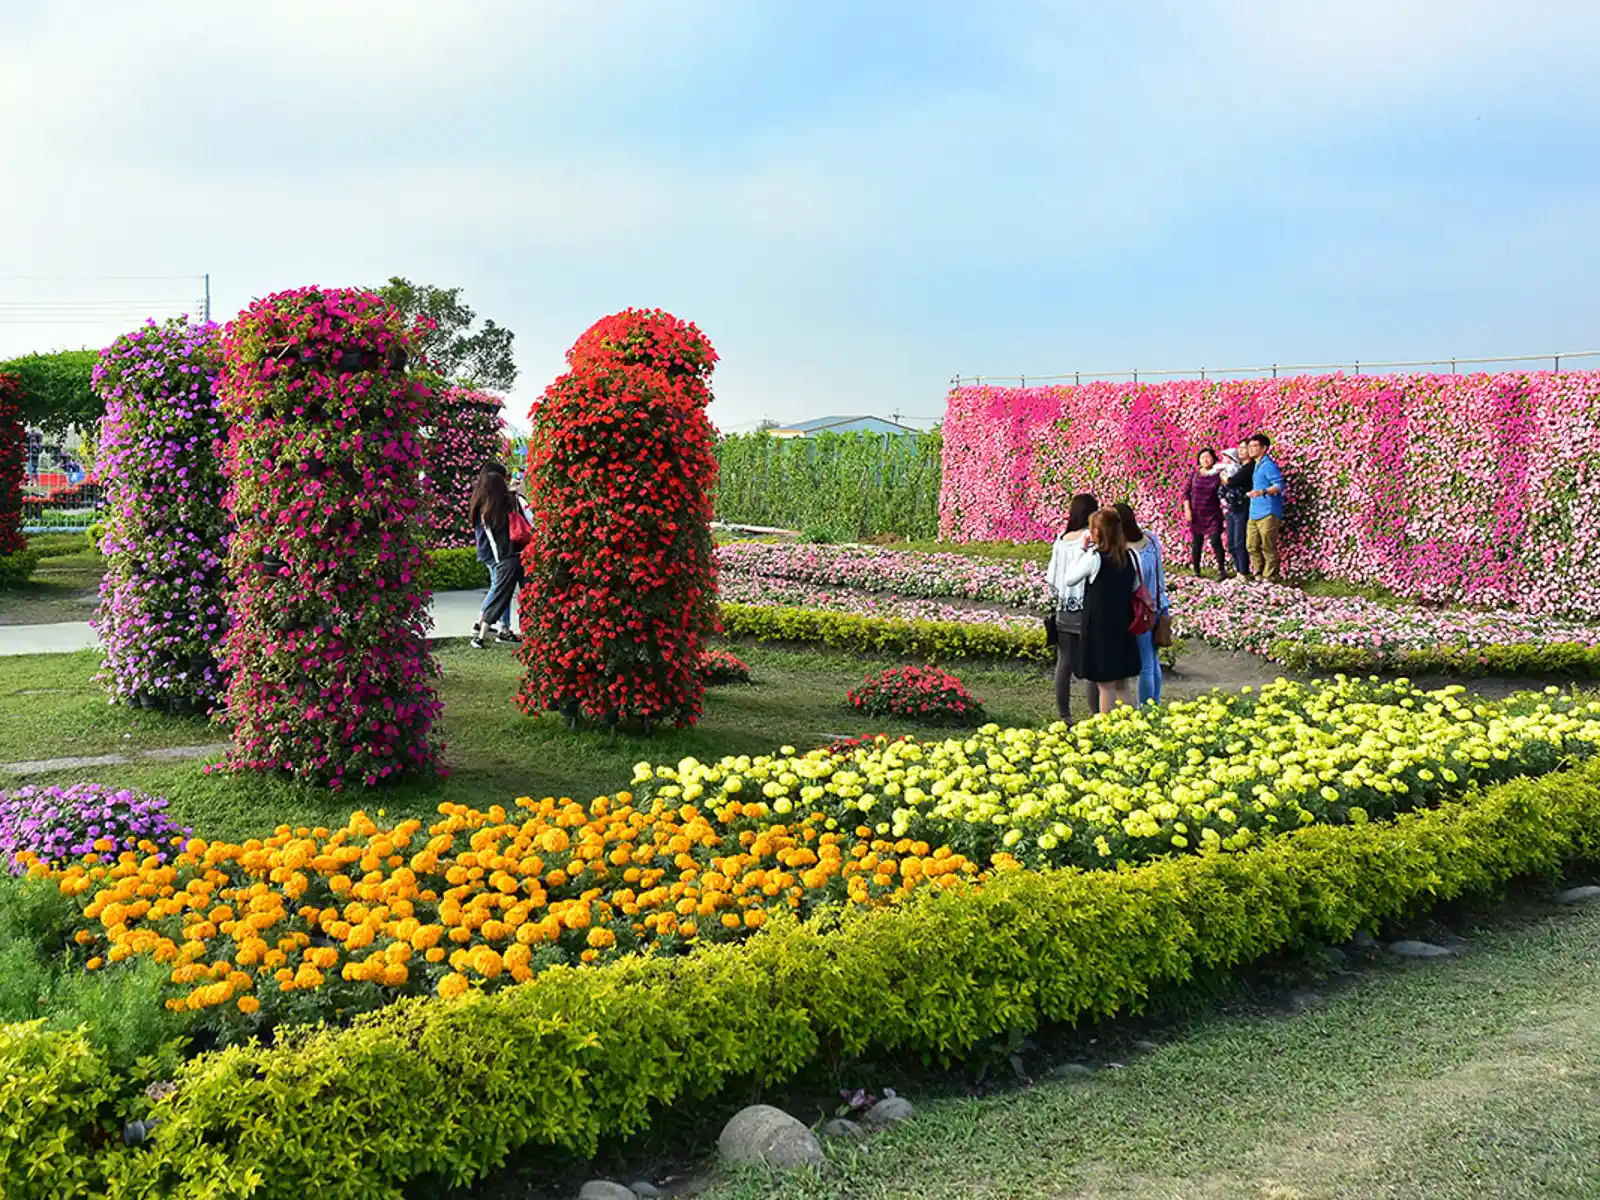 Visitors pose in front of a wall of flowers.